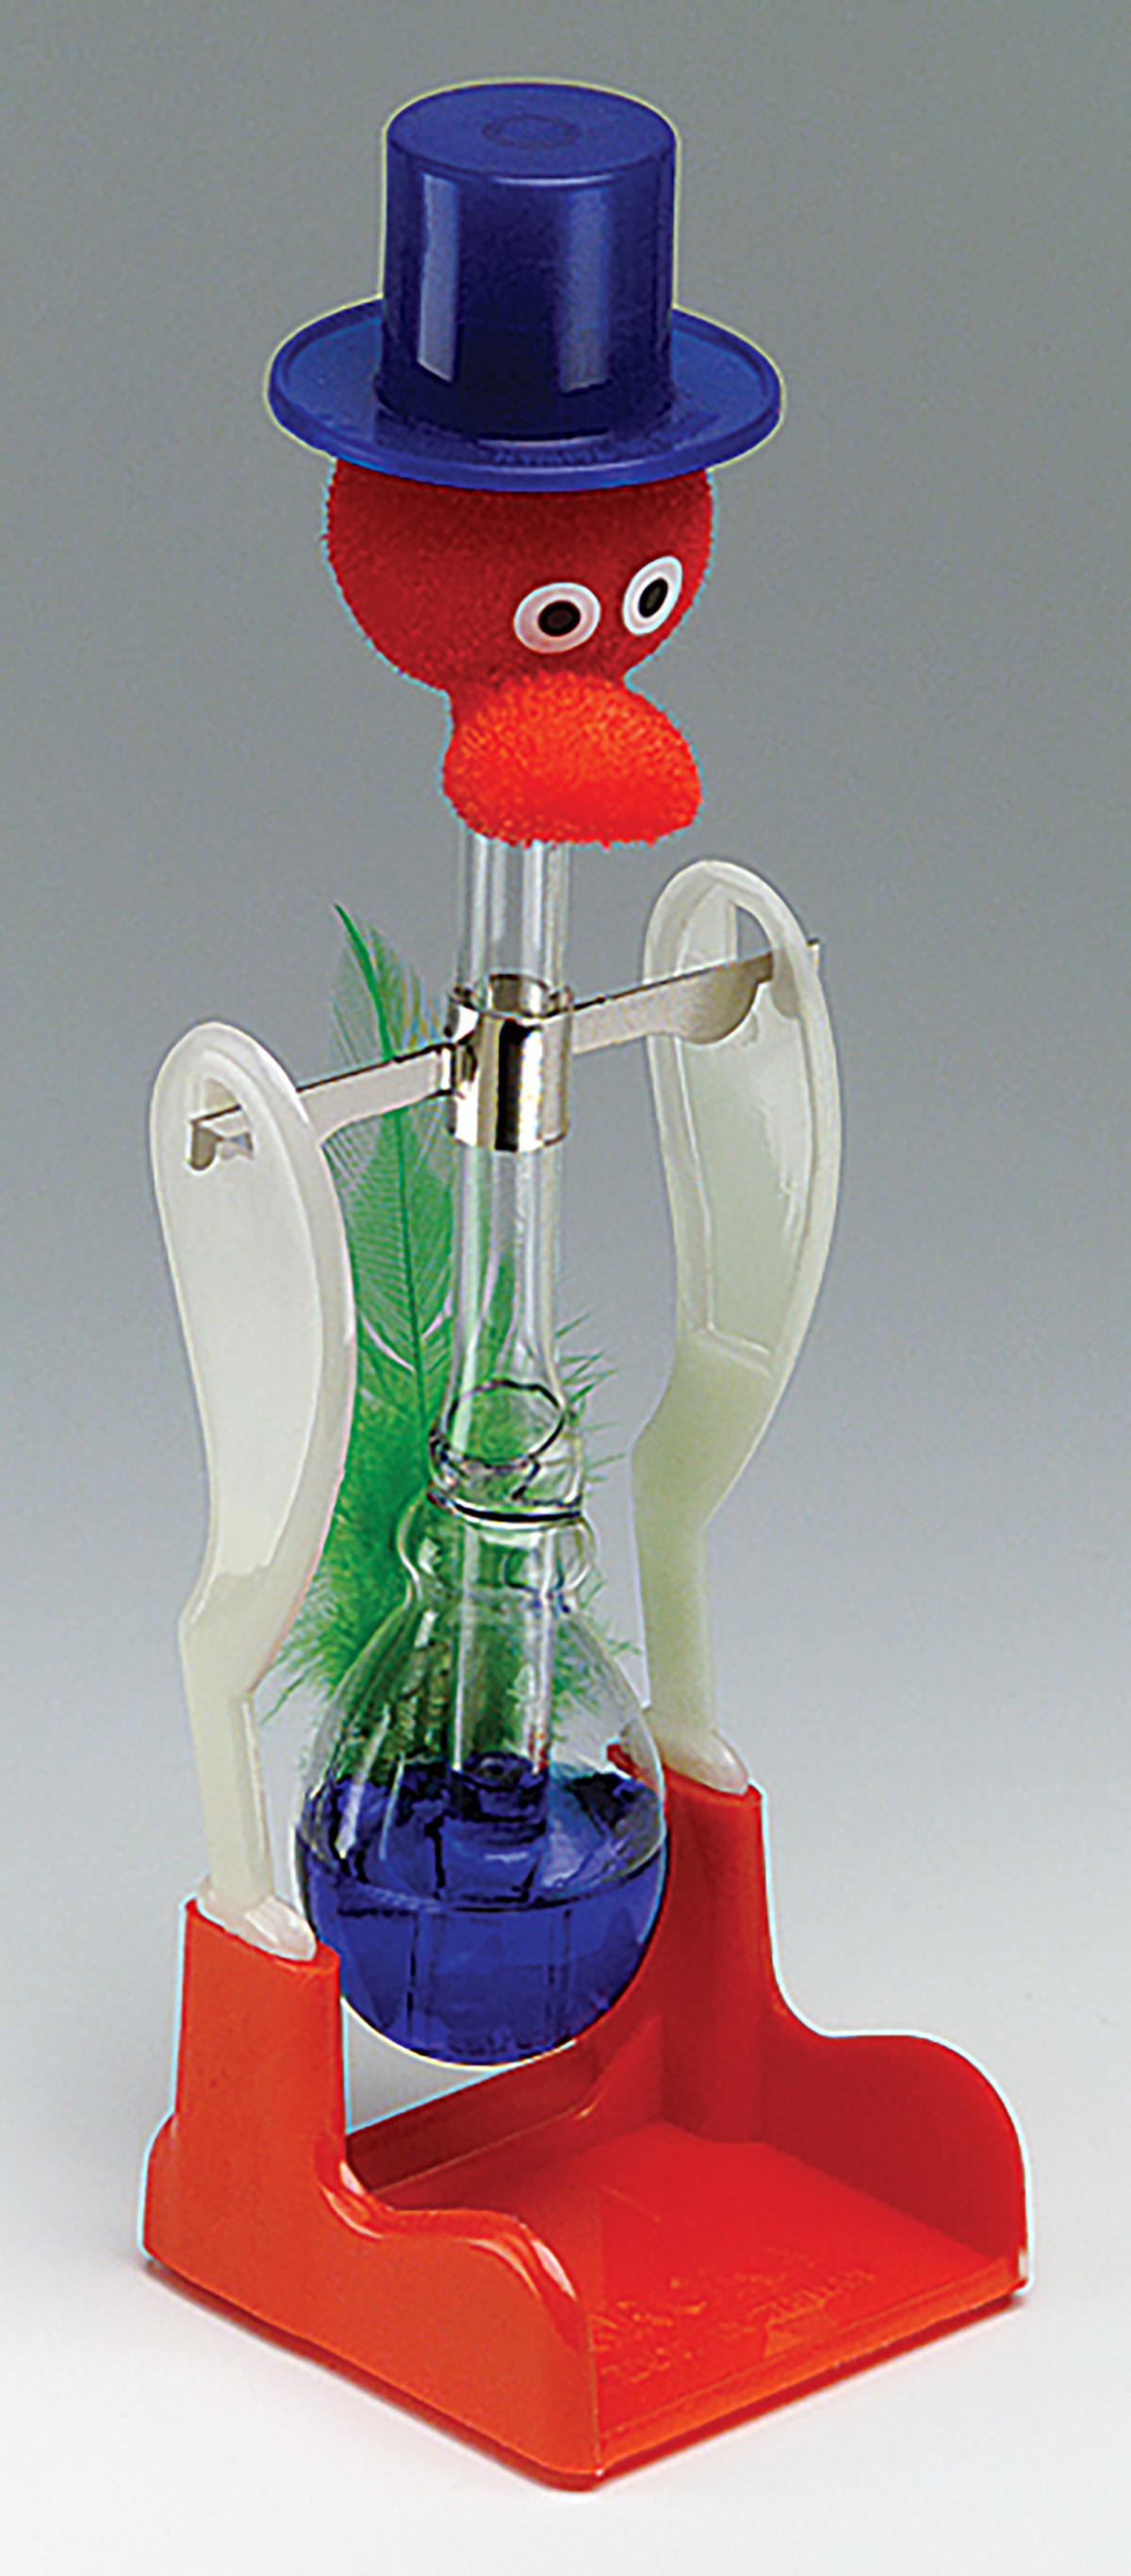 How the Drinking Bird Science Toy Works